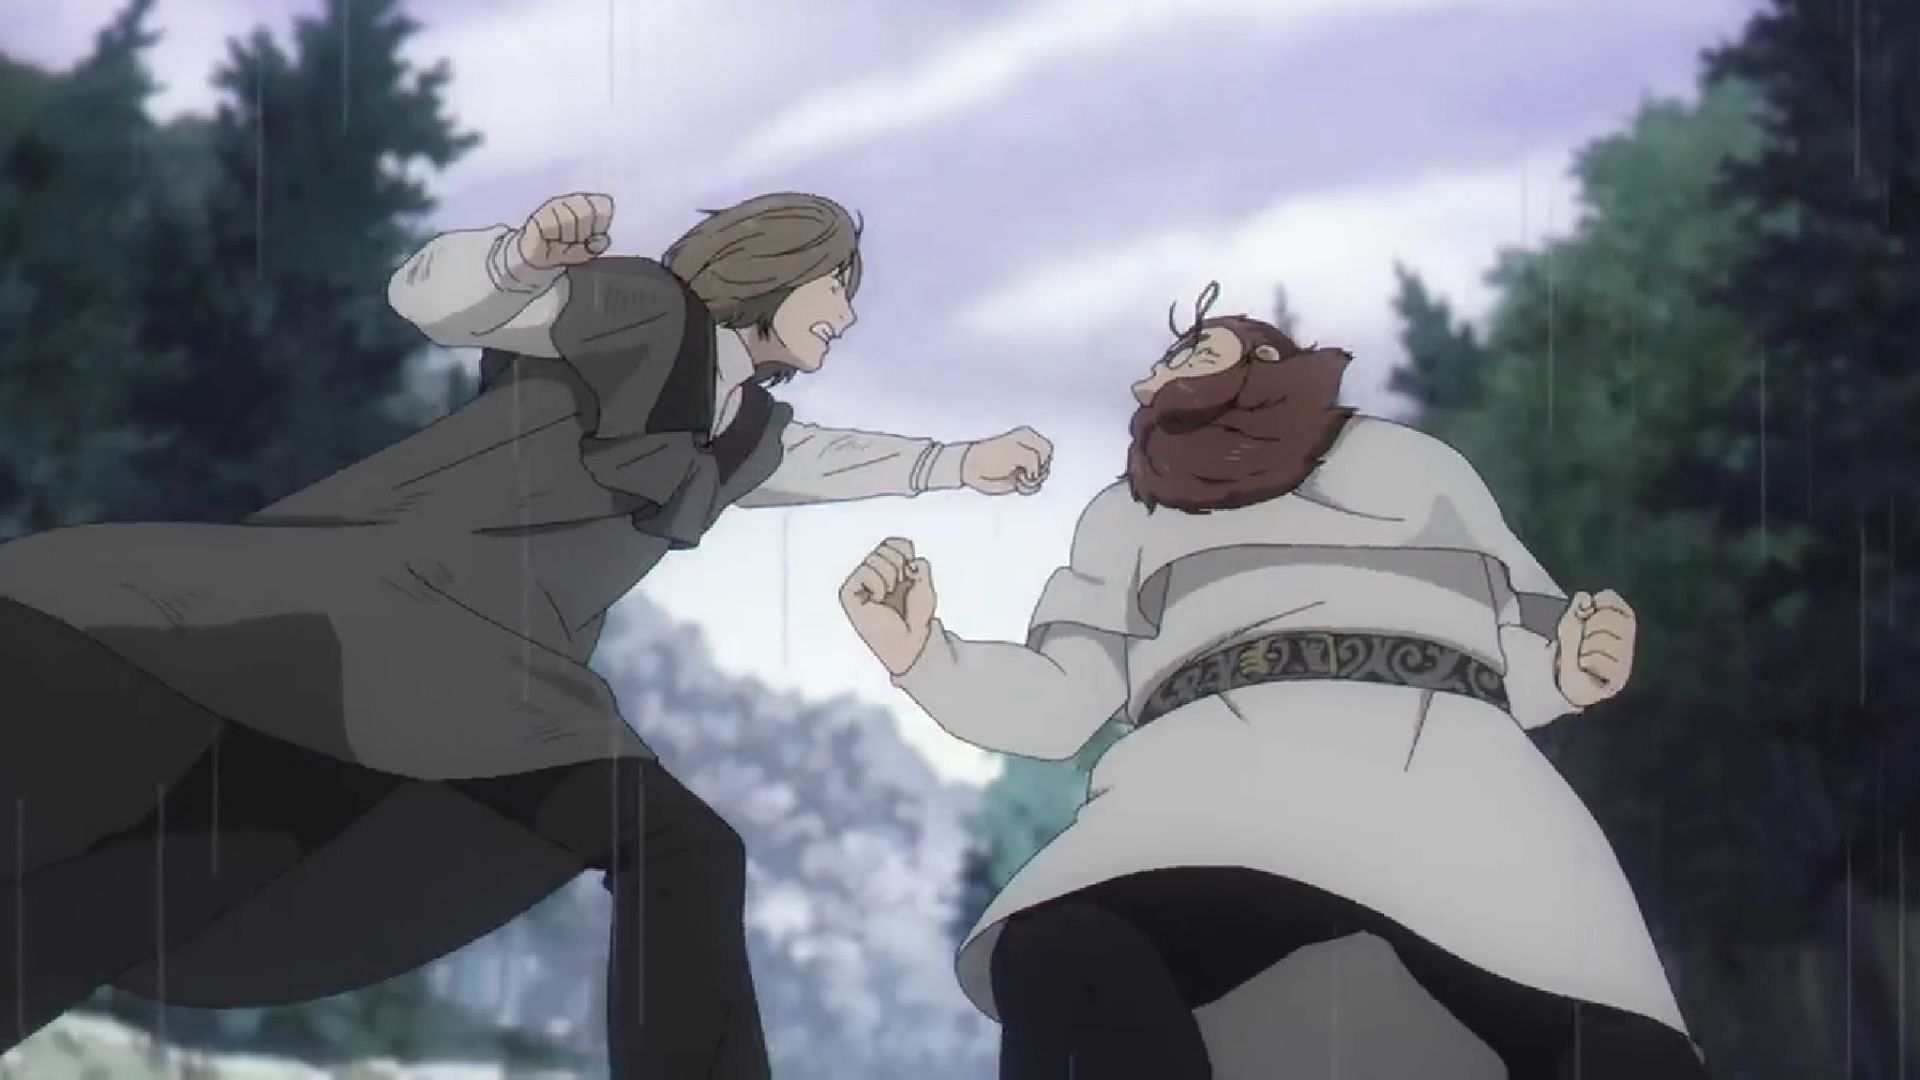 Denken using his fists as shown in the anime (Image via Studio MADHOUSE)